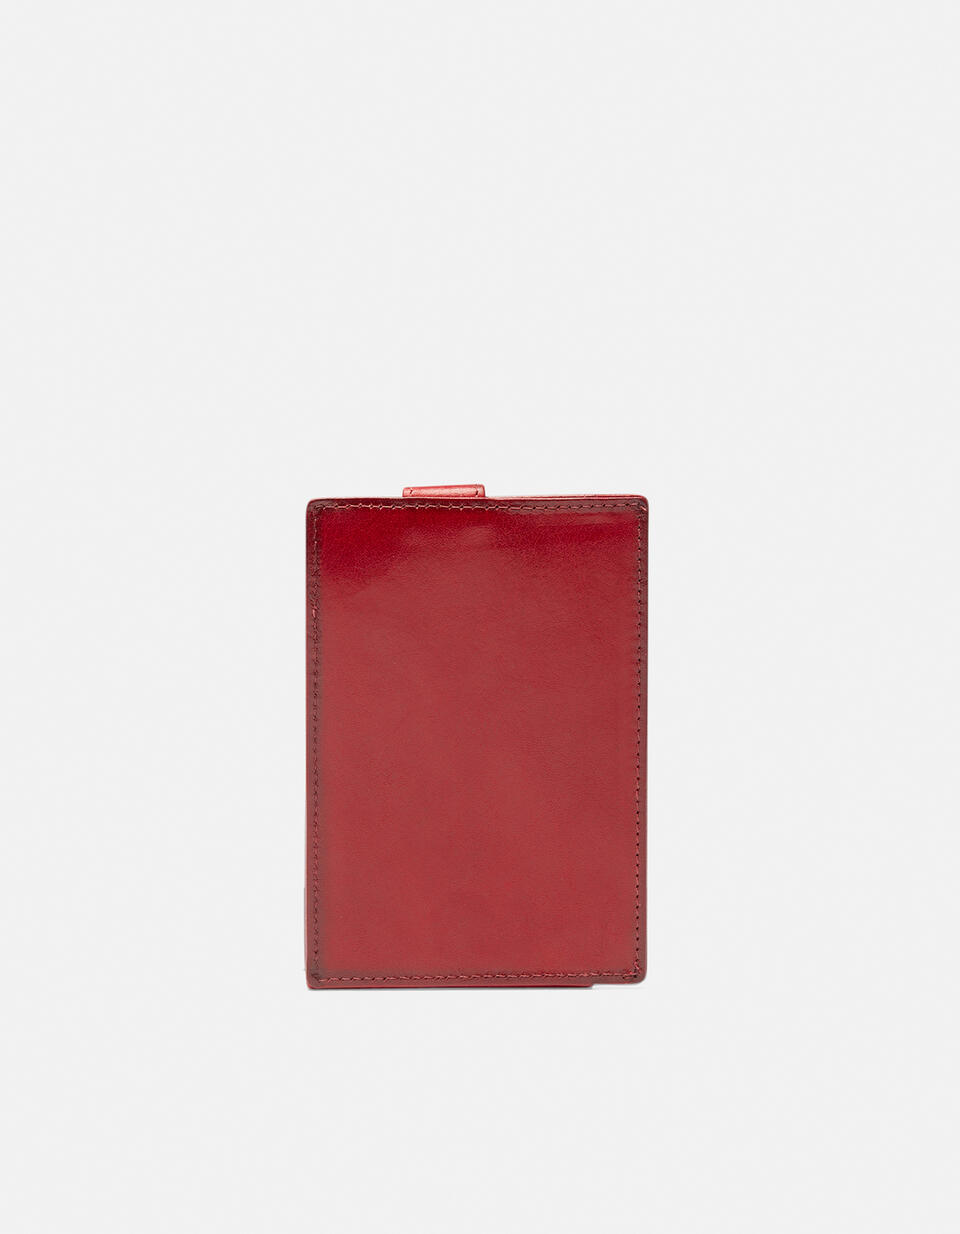 Warm and Color Anti-RFID cardholder - Women's Wallets - Men's Wallets | Wallets ROSSO - Women's Wallets - Men's Wallets | WalletsCuoieria Fiorentina